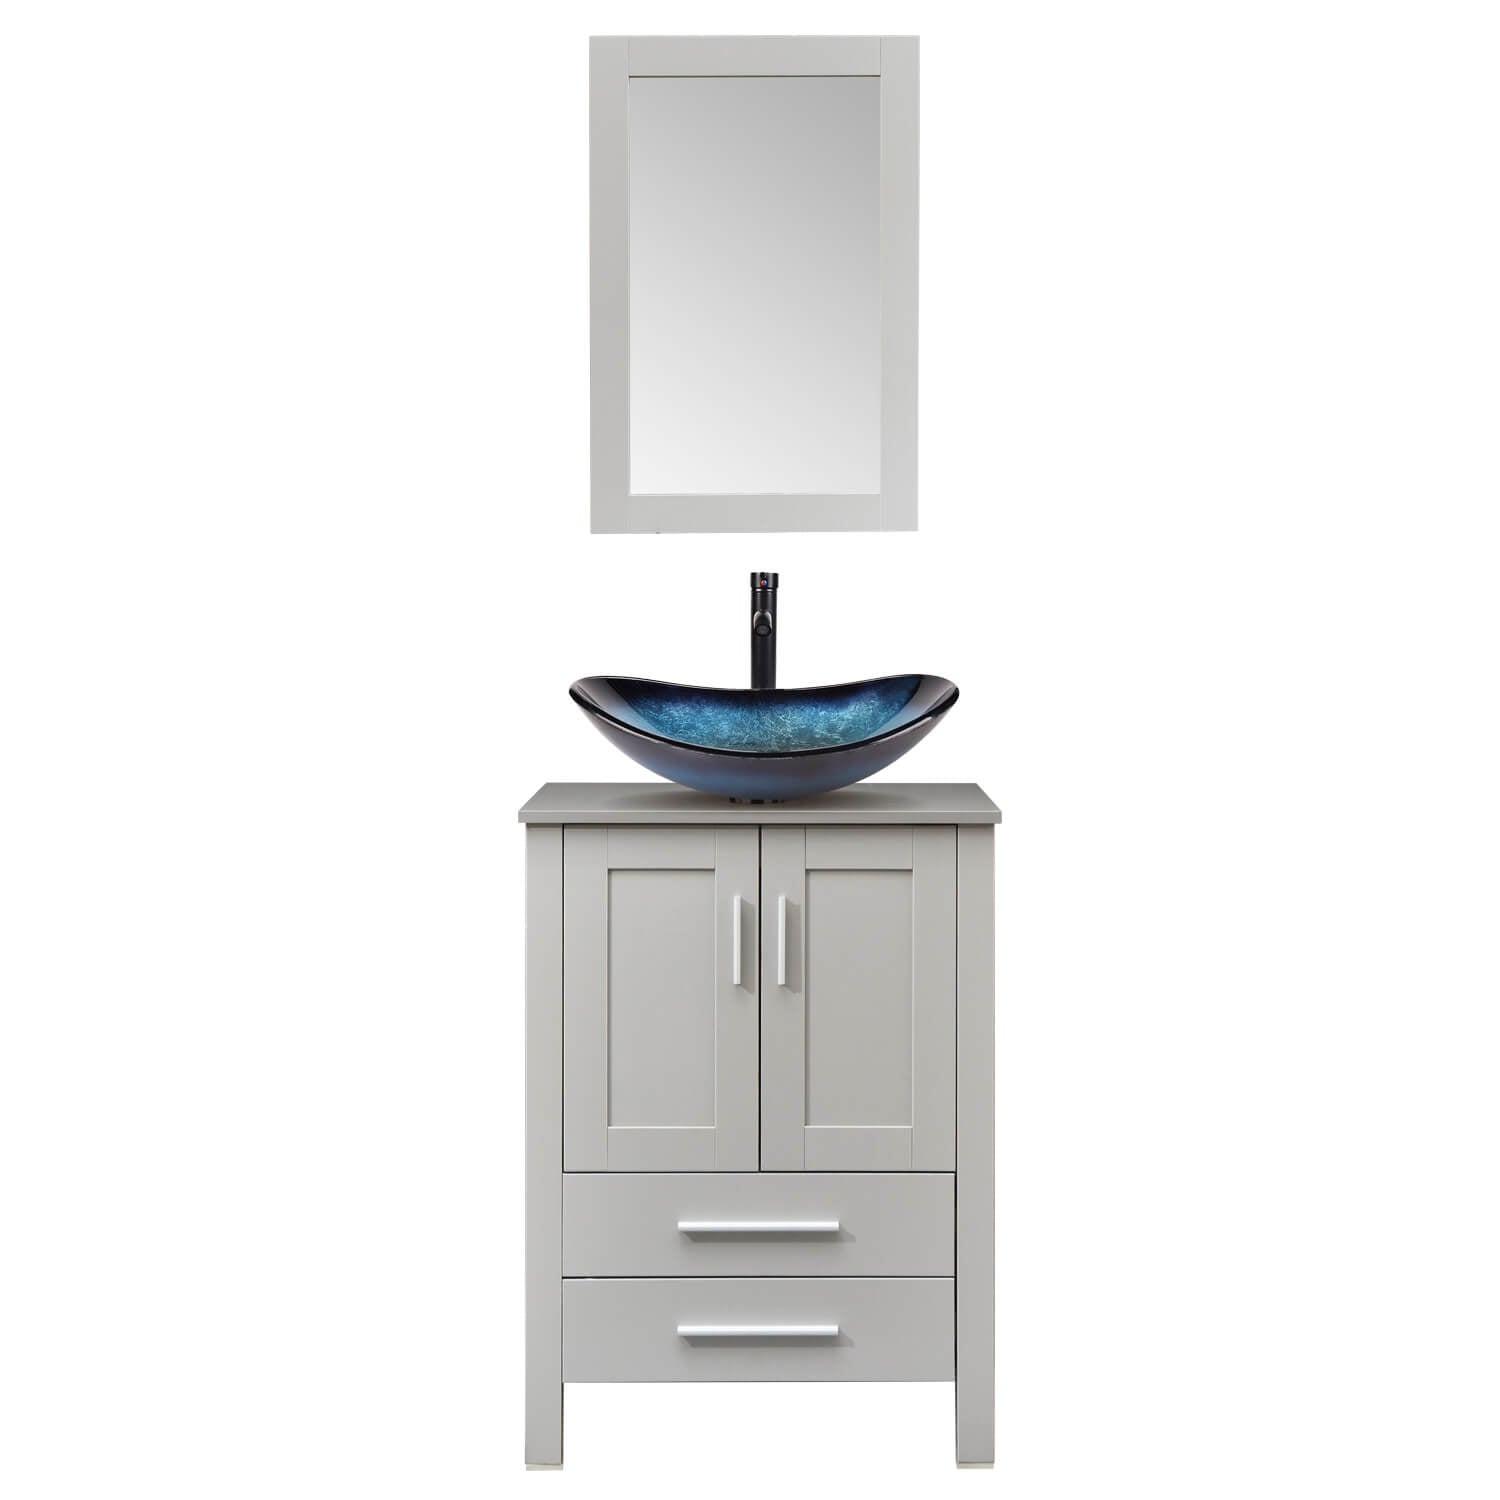 Elecwish gray wood bathroom vanity with blue boat glass sink BG005BL in white background